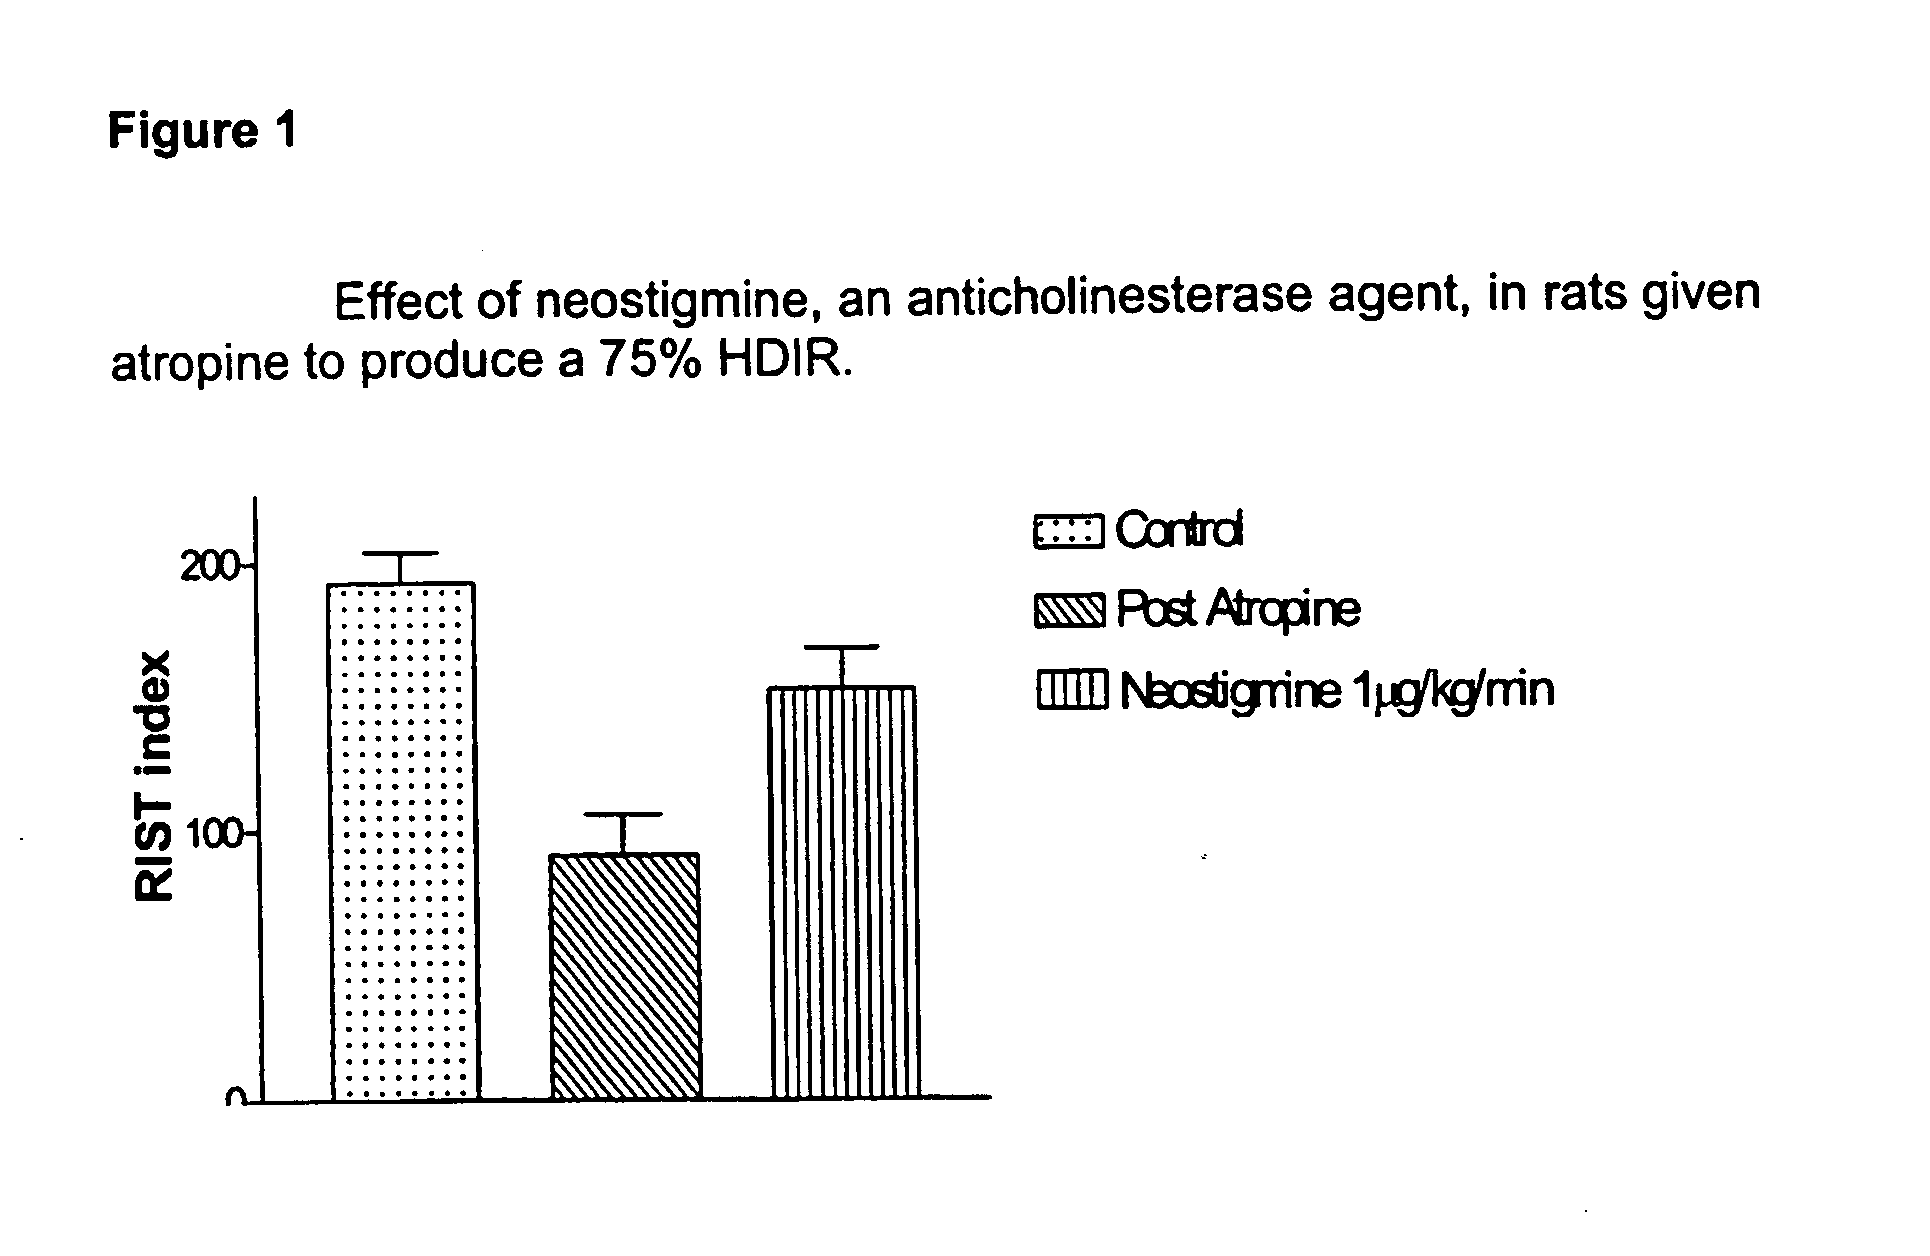 Use of cholinesterase antagonists to treat insulin resistance